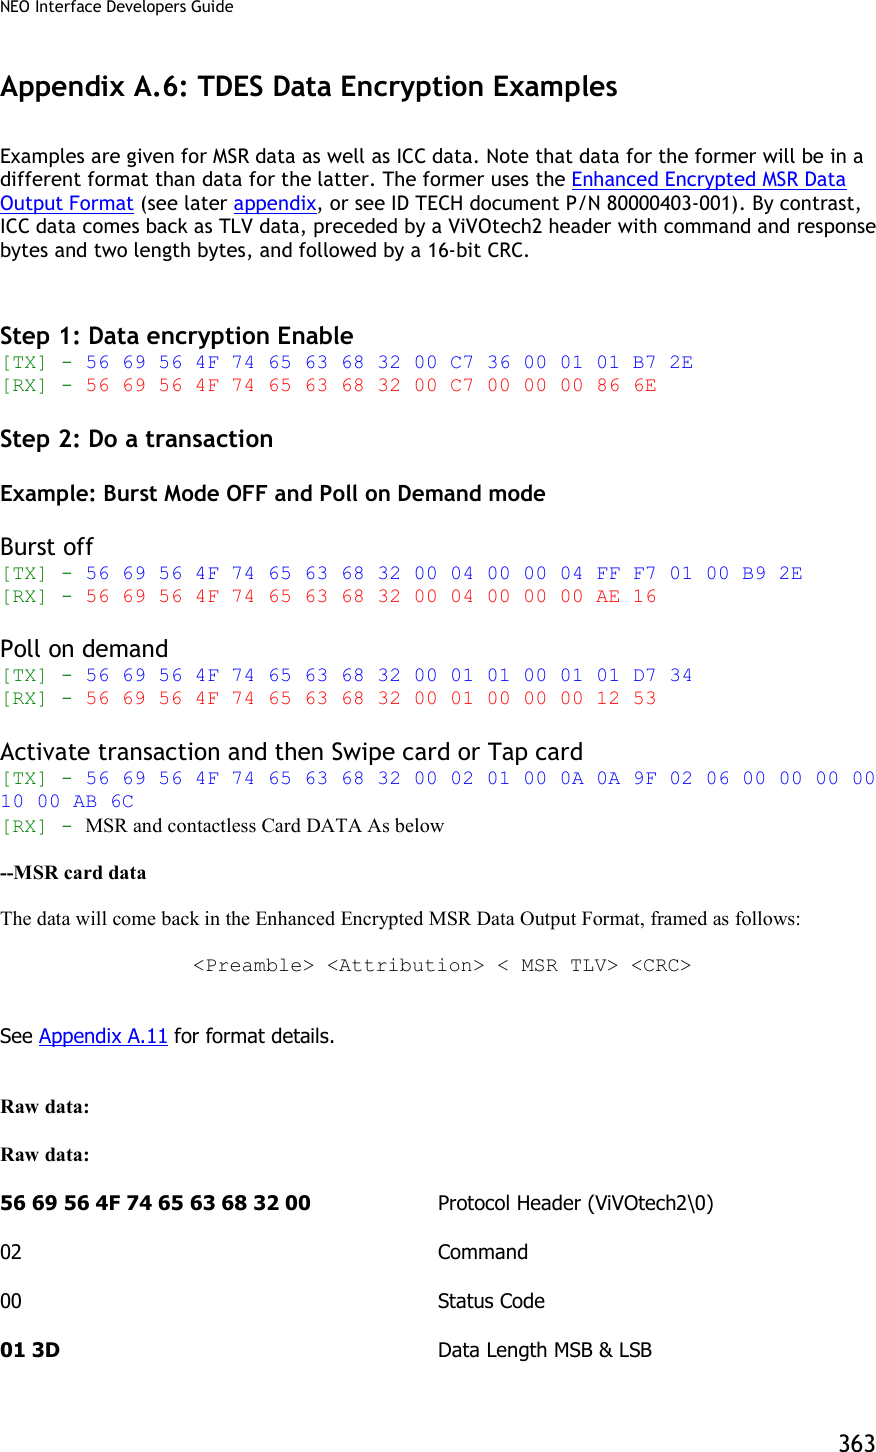 NEO Interface Developers Guide           363 Appendix A.6: TDES Data Encryption Examples  Examples are given for MSR data as well as ICC data. Note that data for the former will be in a different format than data for the latter. The former uses the Enhanced Encrypted MSR Data Output Format (see later appendix, or see ID TECH document P/N 80000403-001). By contrast, ICC data comes back as TLV data, preceded by a ViVOtech2 header with command and response bytes and two length bytes, and followed by a 16-bit CRC.   Step 1: Data encryption Enable [TX] - 56 69 56 4F 74 65 63 68 32 00 C7 36 00 01 01 B7 2E  [RX] - 56 69 56 4F 74 65 63 68 32 00 C7 00 00 00 86 6E  Step 2: Do a transaction  Example: Burst Mode OFF and Poll on Demand mode  Burst off [TX] - 56 69 56 4F 74 65 63 68 32 00 04 00 00 04 FF F7 01 00 B9 2E  [RX] - 56 69 56 4F 74 65 63 68 32 00 04 00 00 00 AE 16  Poll on demand [TX] - 56 69 56 4F 74 65 63 68 32 00 01 01 00 01 01 D7 34  [RX] - 56 69 56 4F 74 65 63 68 32 00 01 00 00 00 12 53  Activate transaction and then Swipe card or Tap card [TX] - 56 69 56 4F 74 65 63 68 32 00 02 01 00 0A 0A 9F 02 06 00 00 00 00 10 00 AB 6C  [RX] - MSR and contactless Card DATA As below  --MSR card data  The data will come back in the Enhanced Encrypted MSR Data Output Format, framed as follows:  &lt;Preamble&gt; &lt;Attribution&gt; &lt; MSR TLV&gt; &lt;CRC&gt;   See Appendix A.11 for format details.   Raw data:     Raw data:     56 69 56 4F 74 65 63 68 32 00     Protocol Header (ViVOtech2\0)  02              Command   00            Status Code  01 3D            Data Length MSB &amp; LSB 